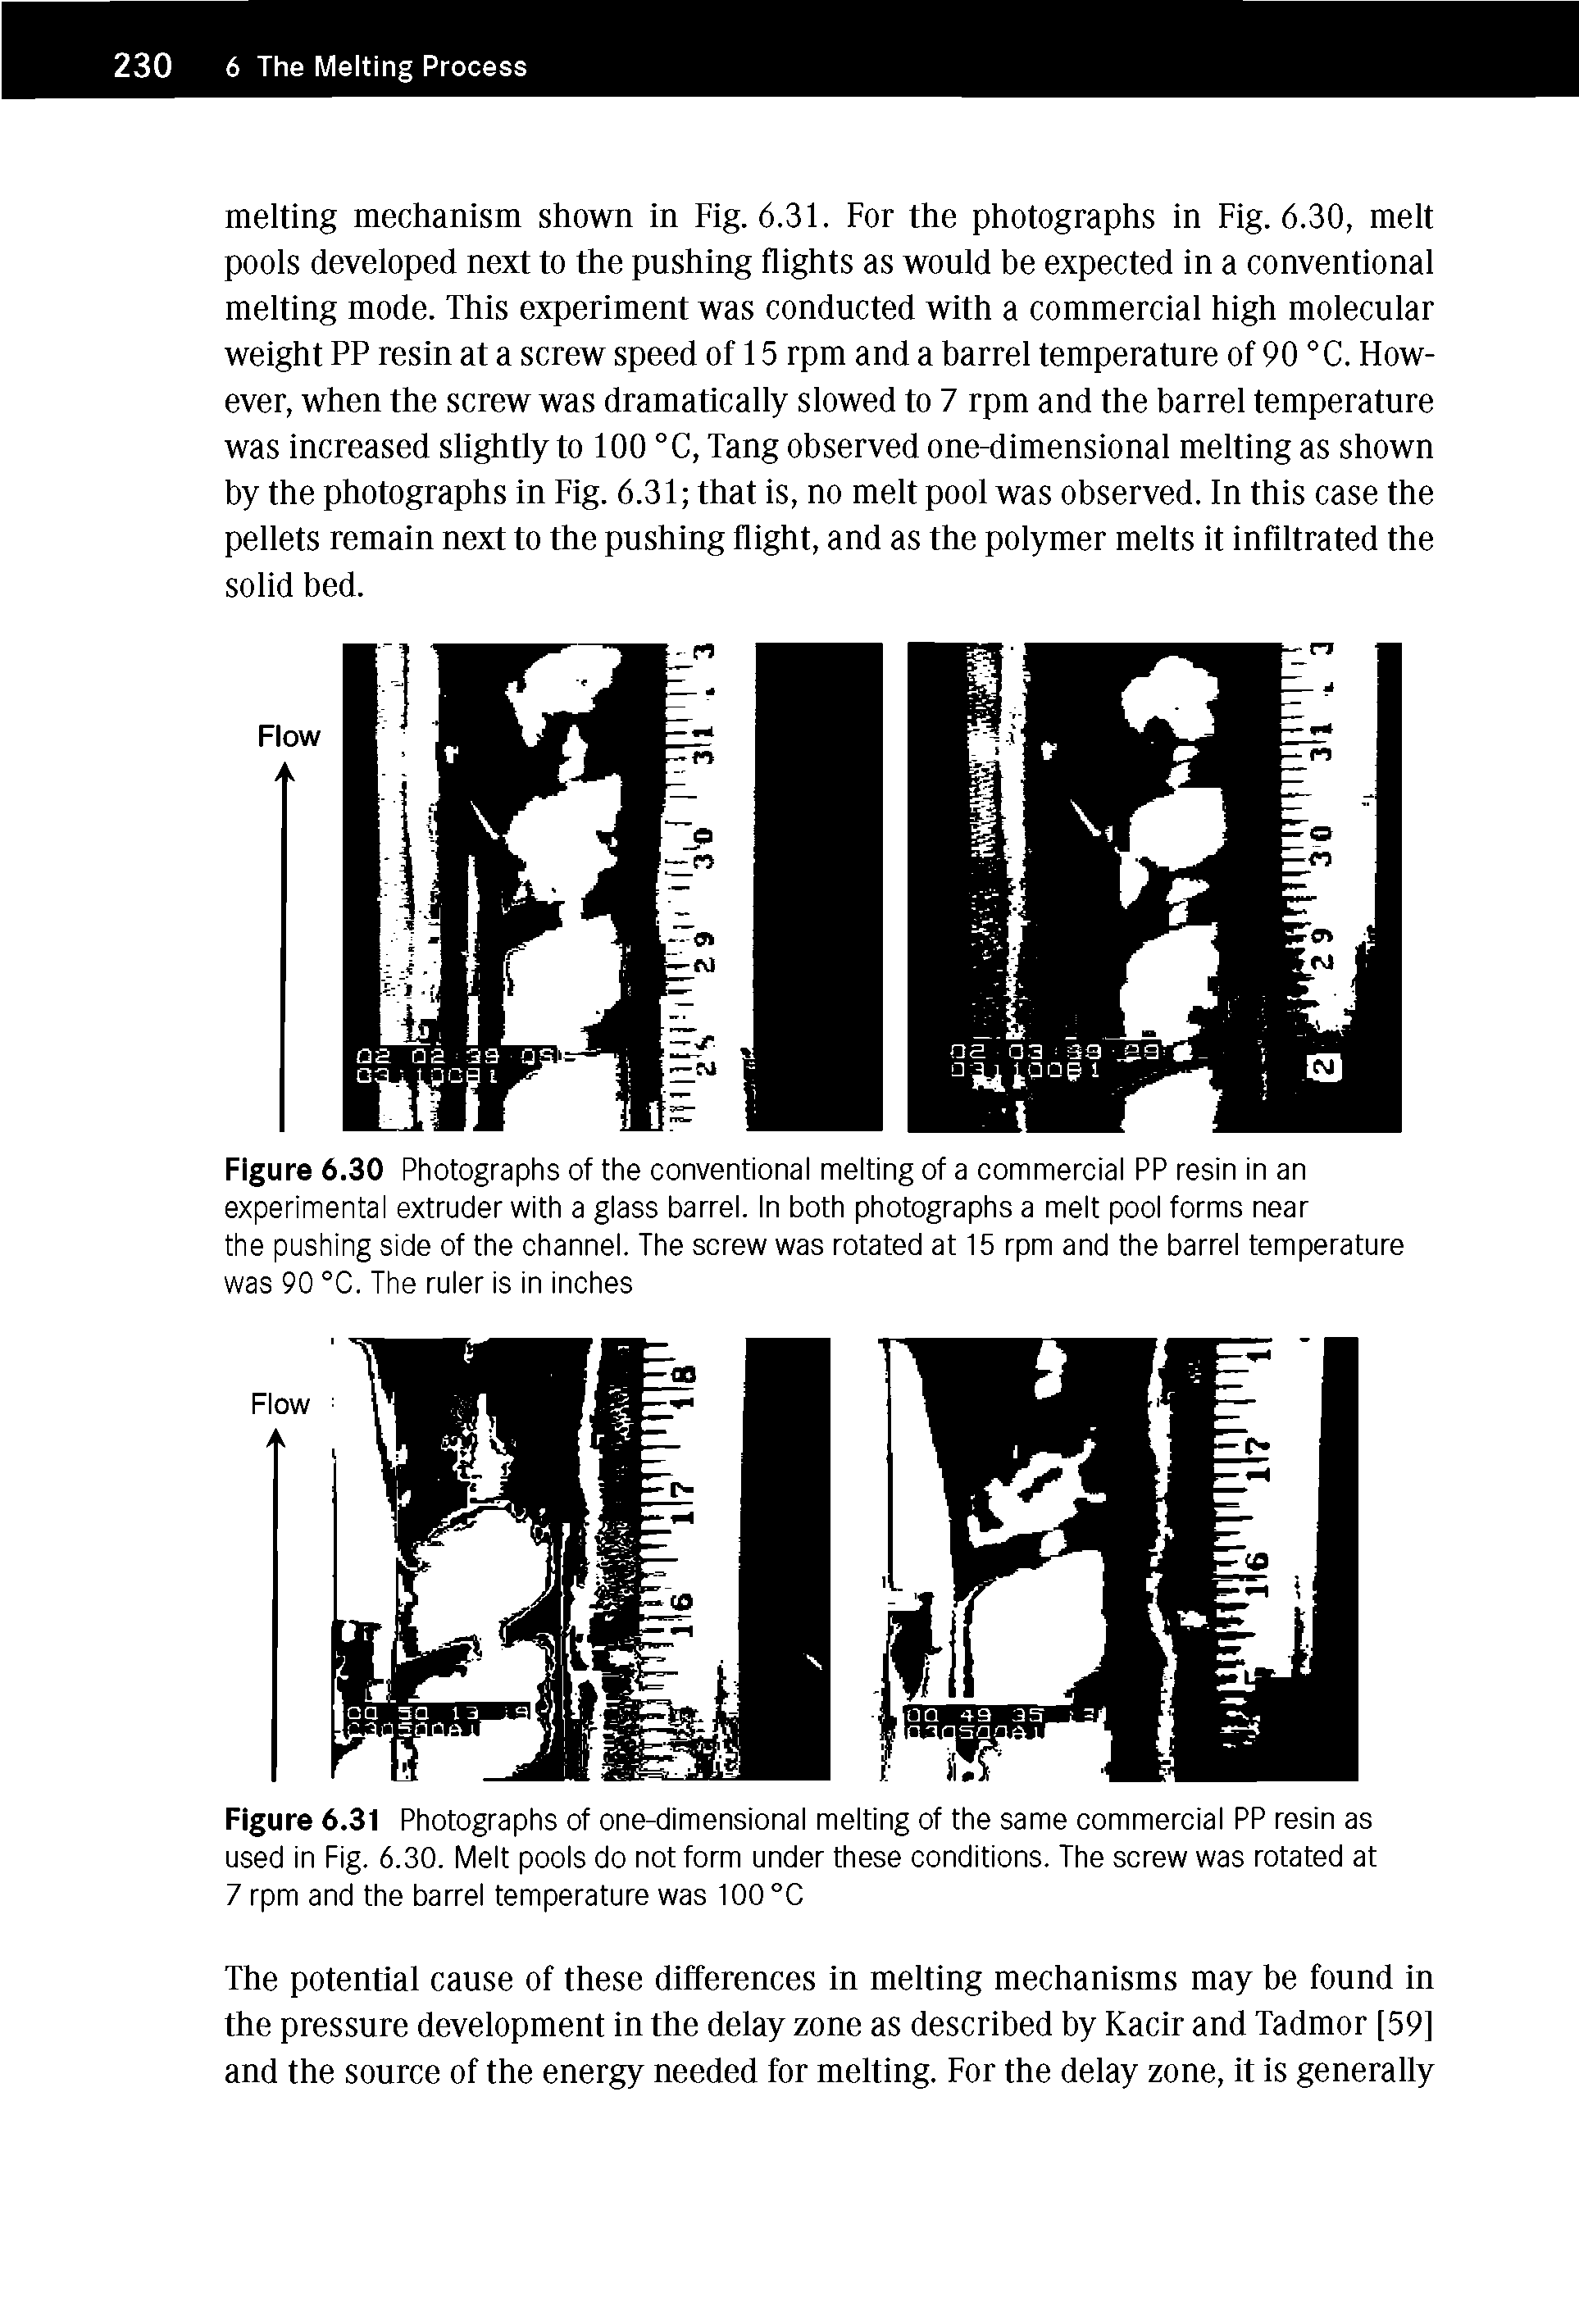 Figure 6.30 Photographs of the conventional melting of a commercial PP resin in an experimental extruder with a glass barrel. In both photographs a melt pool forms near the pushing side of the channel. The screw was rotated at 15 rpm and the barrel temperature was 90 °C. The ruler Is In Inches...